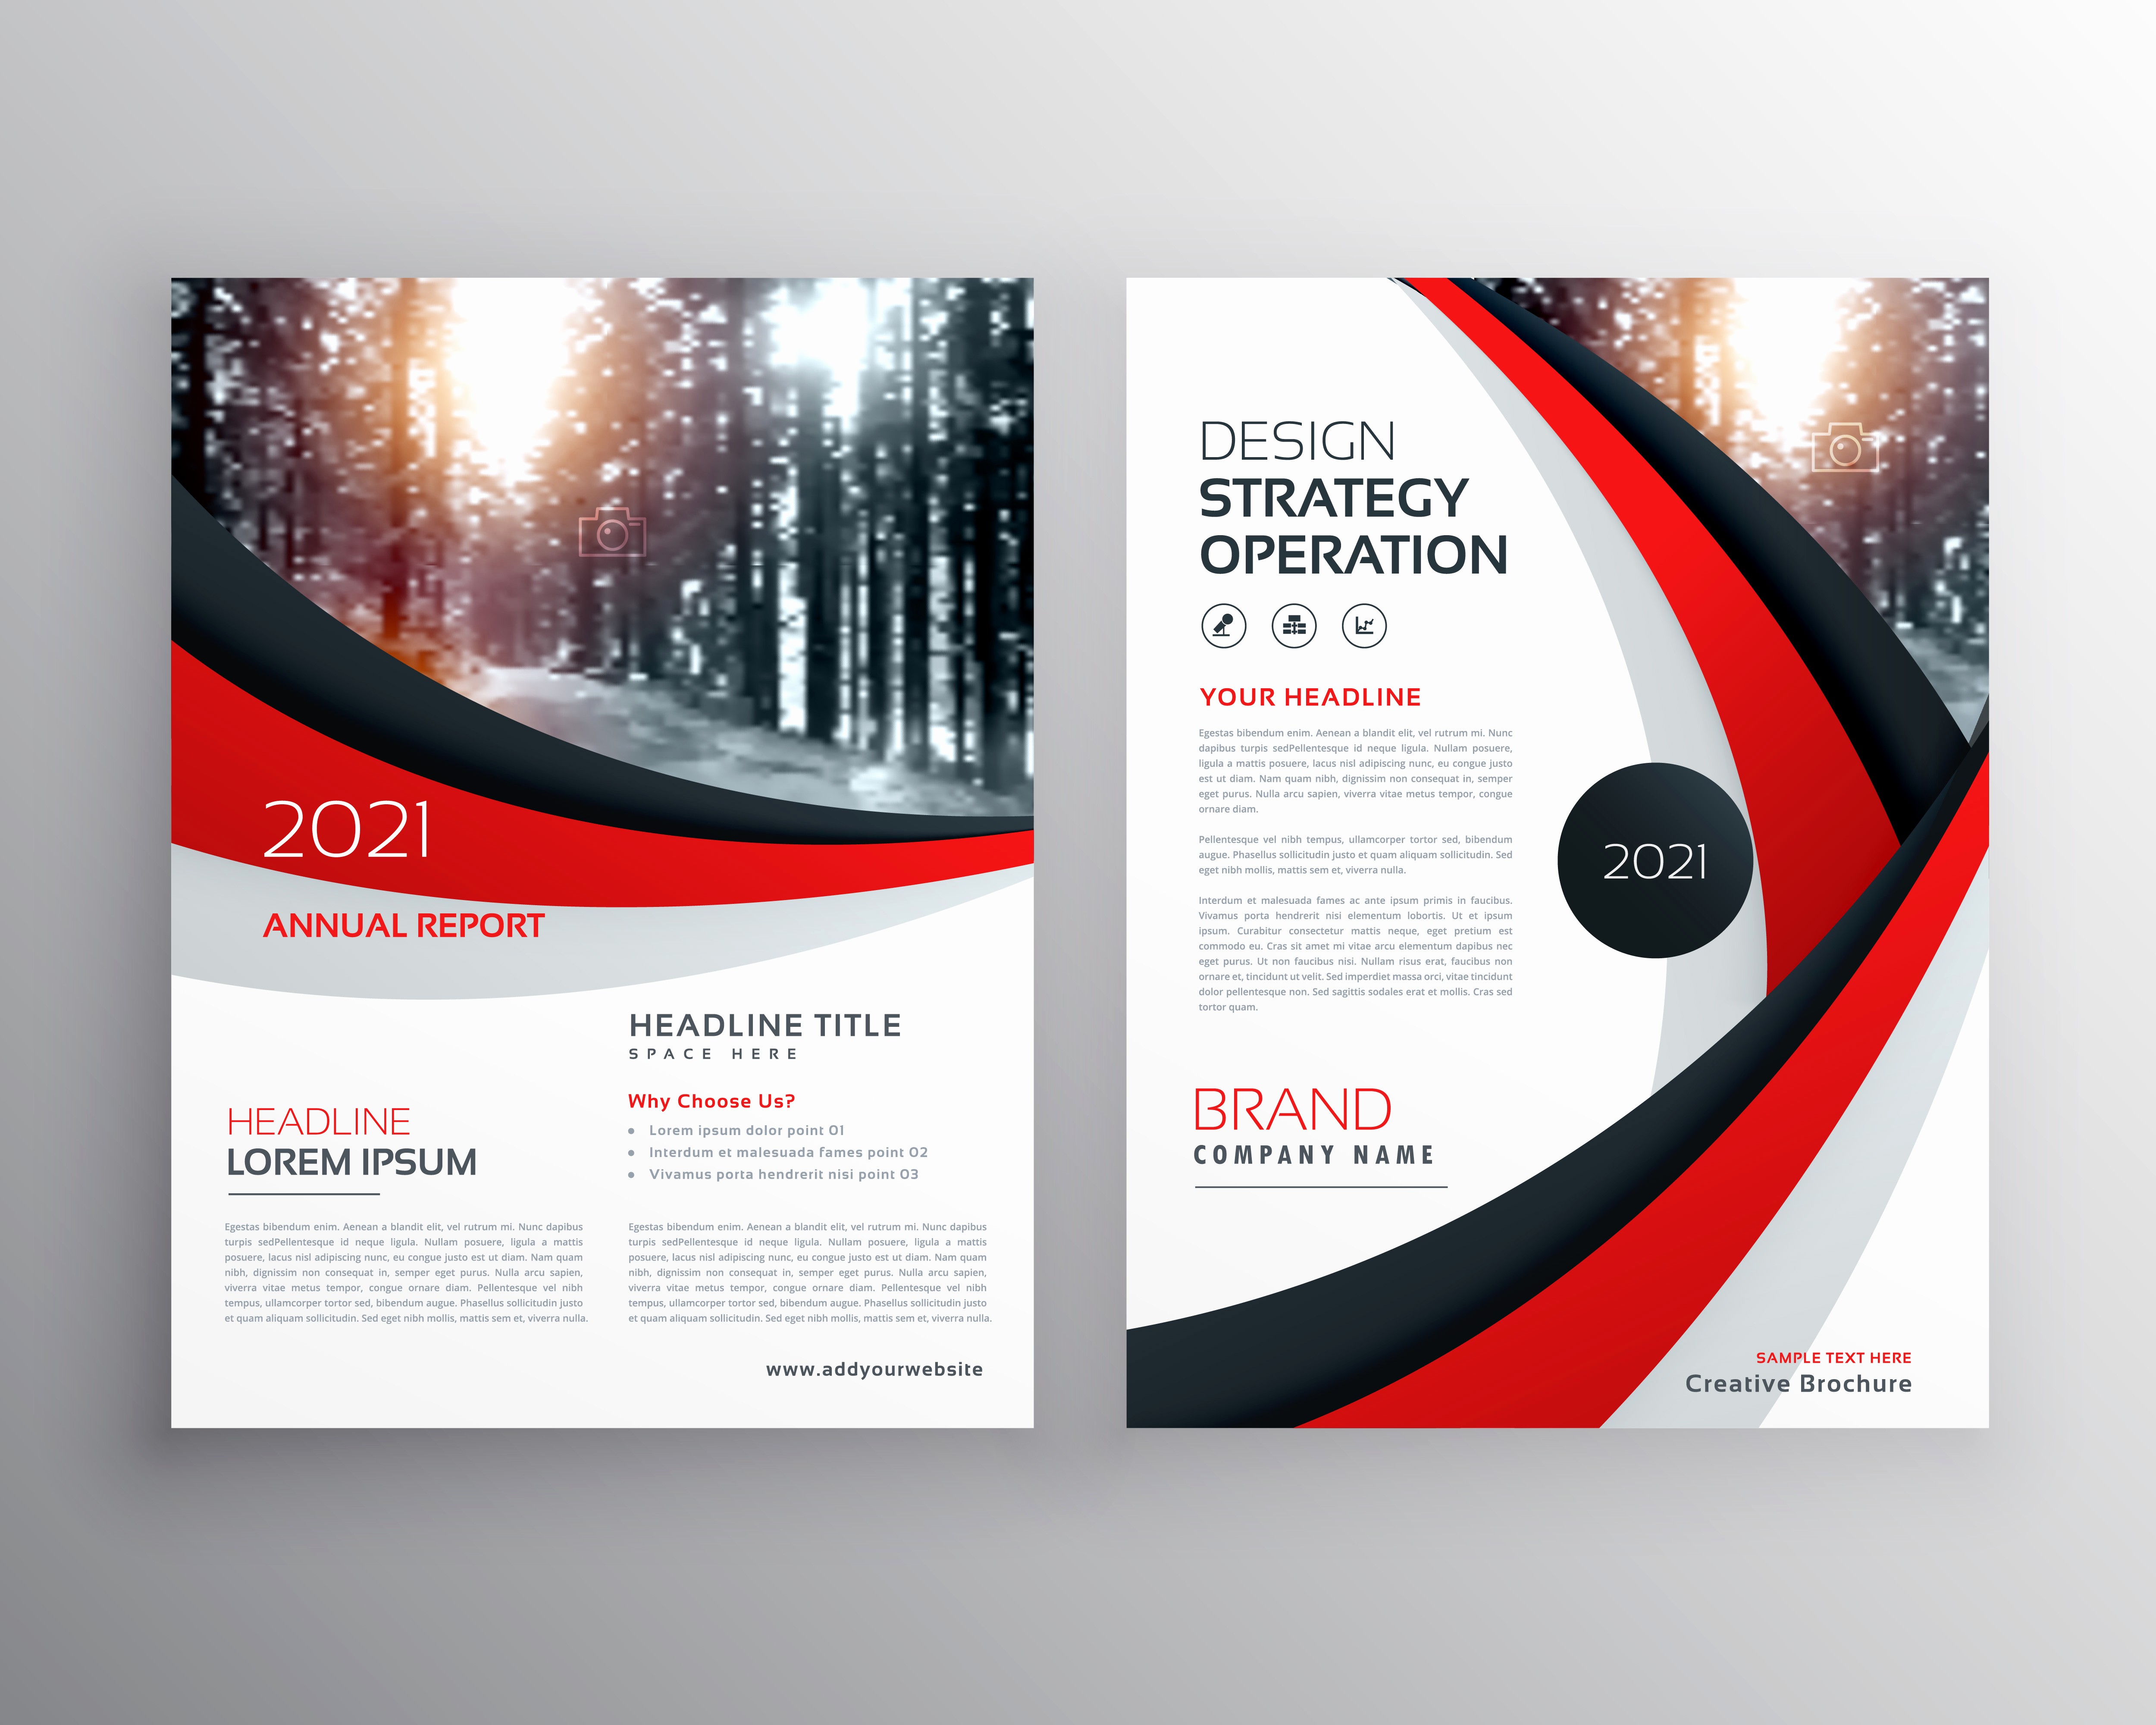 Templates for Flyers and Brochures Inspirational Business Flyer Brochure Design Template with Red and Black